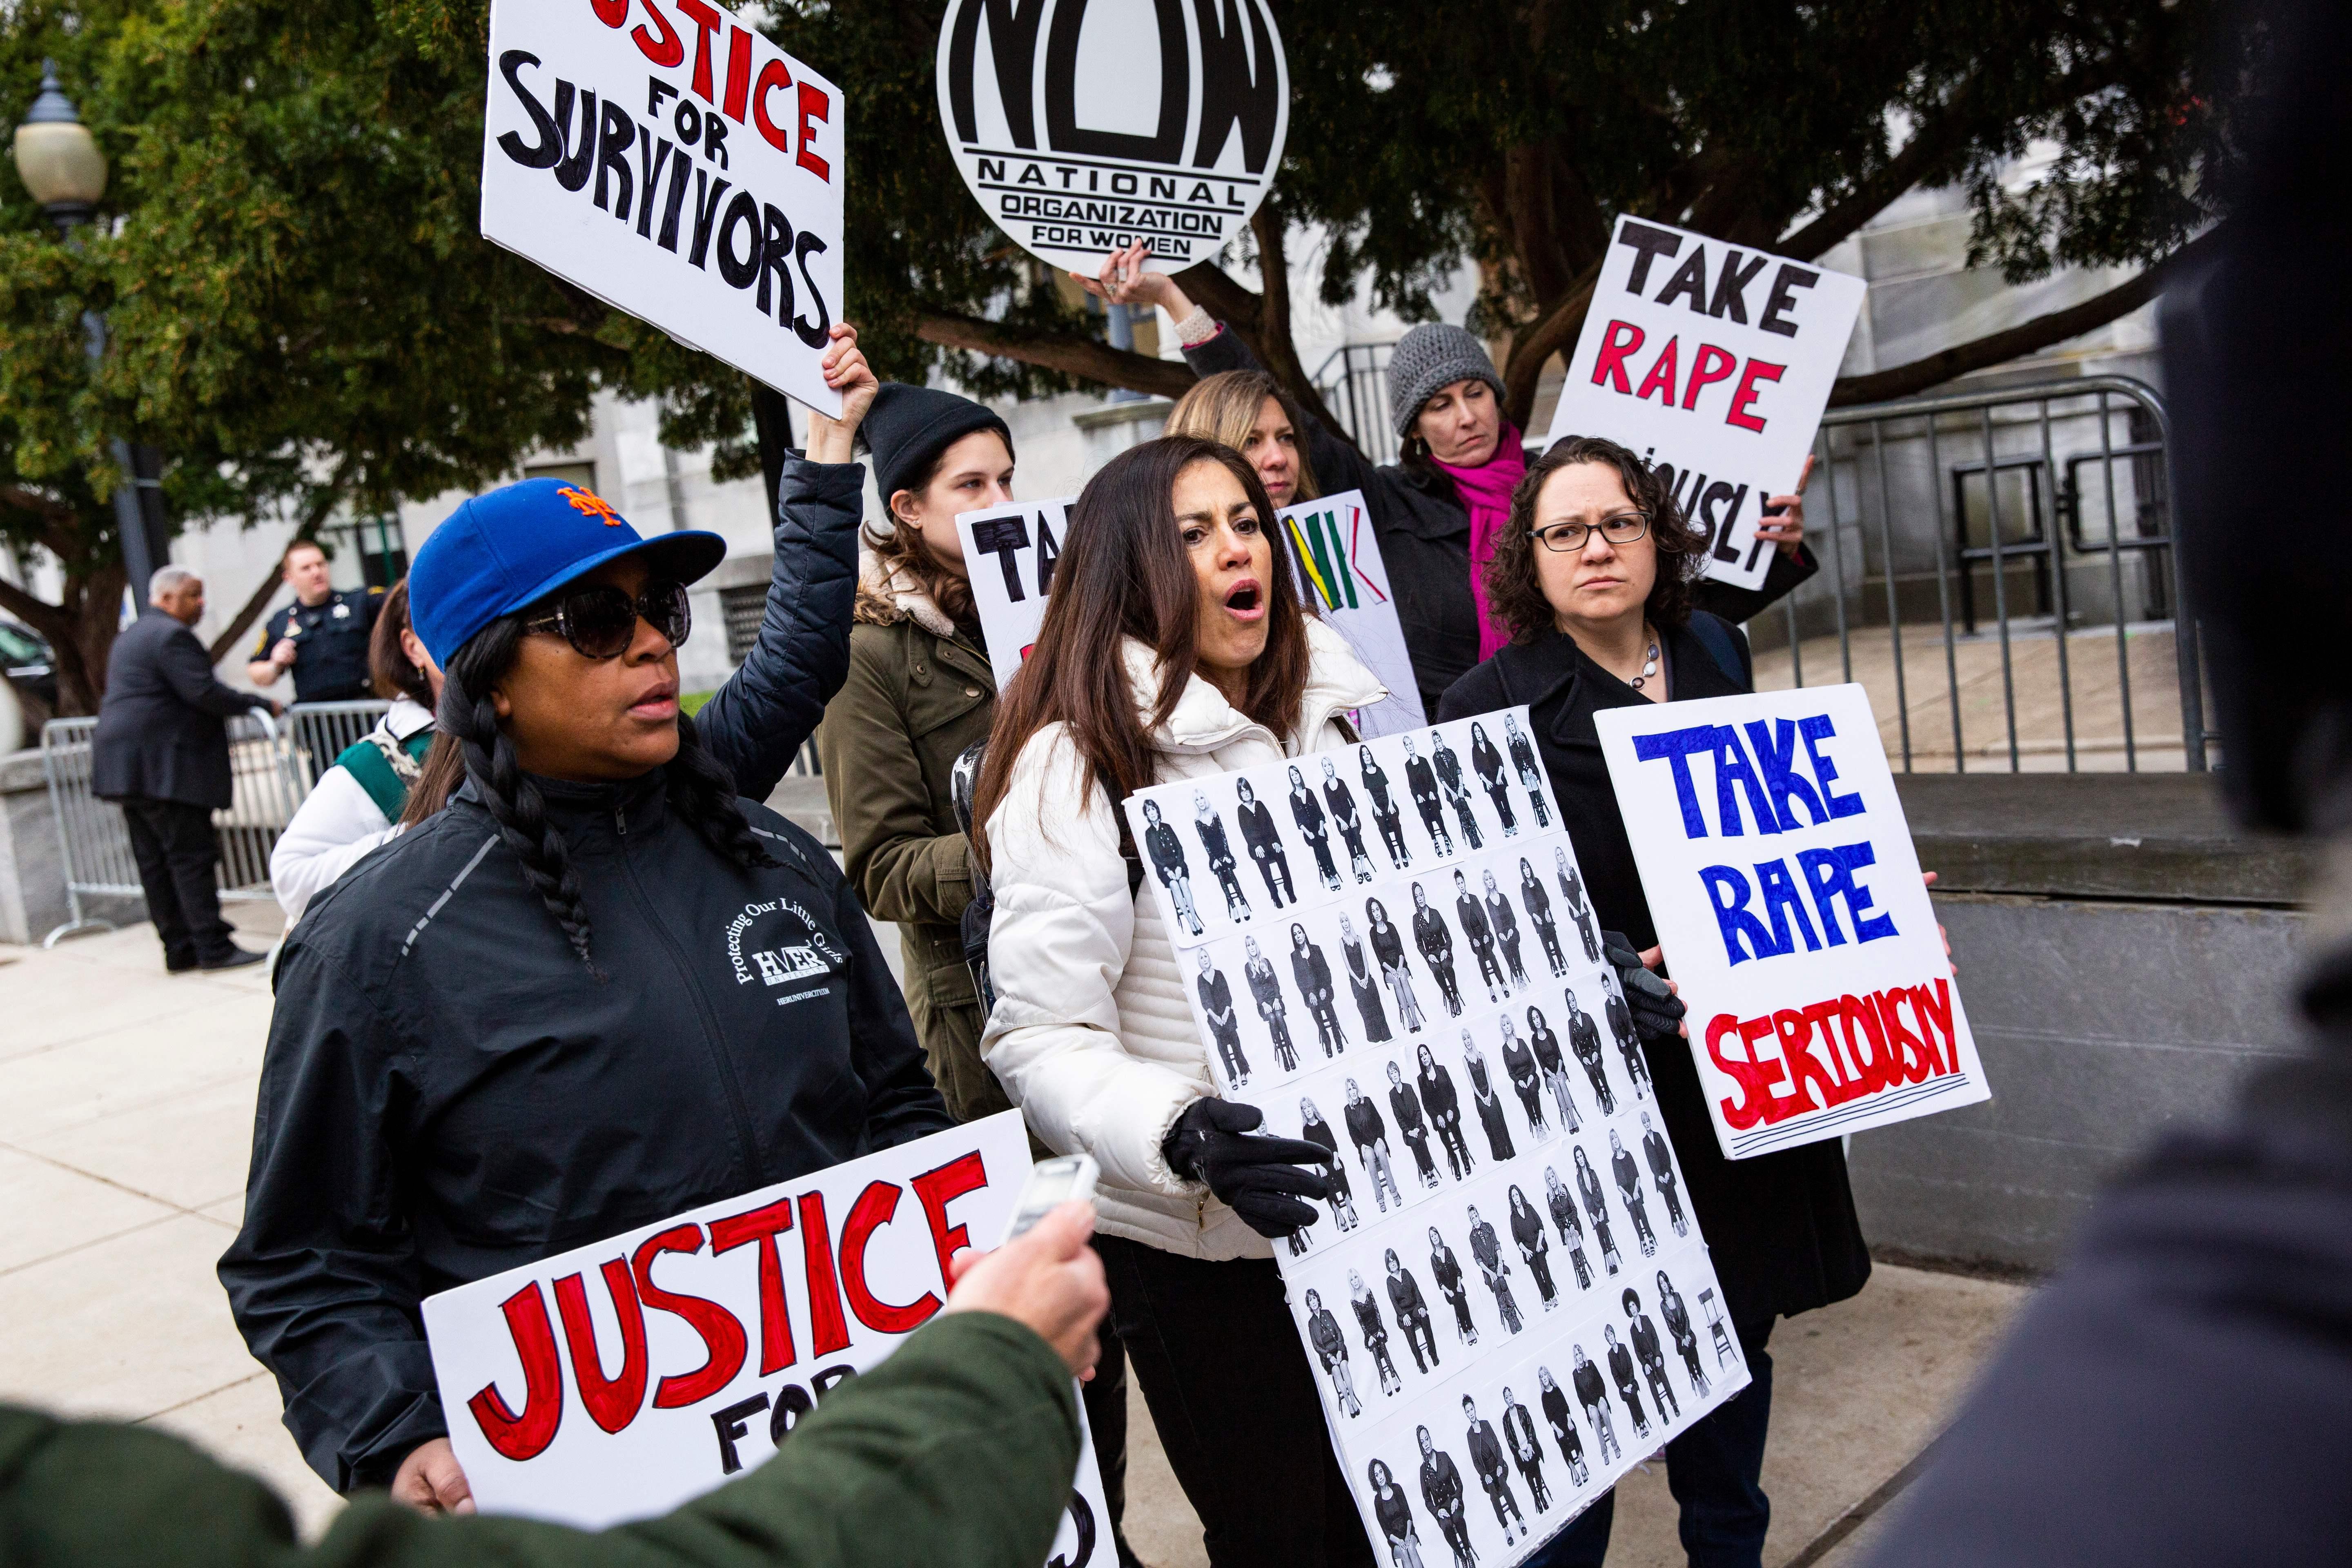 Protesters hold signs saying things like, "Take rape seriously."